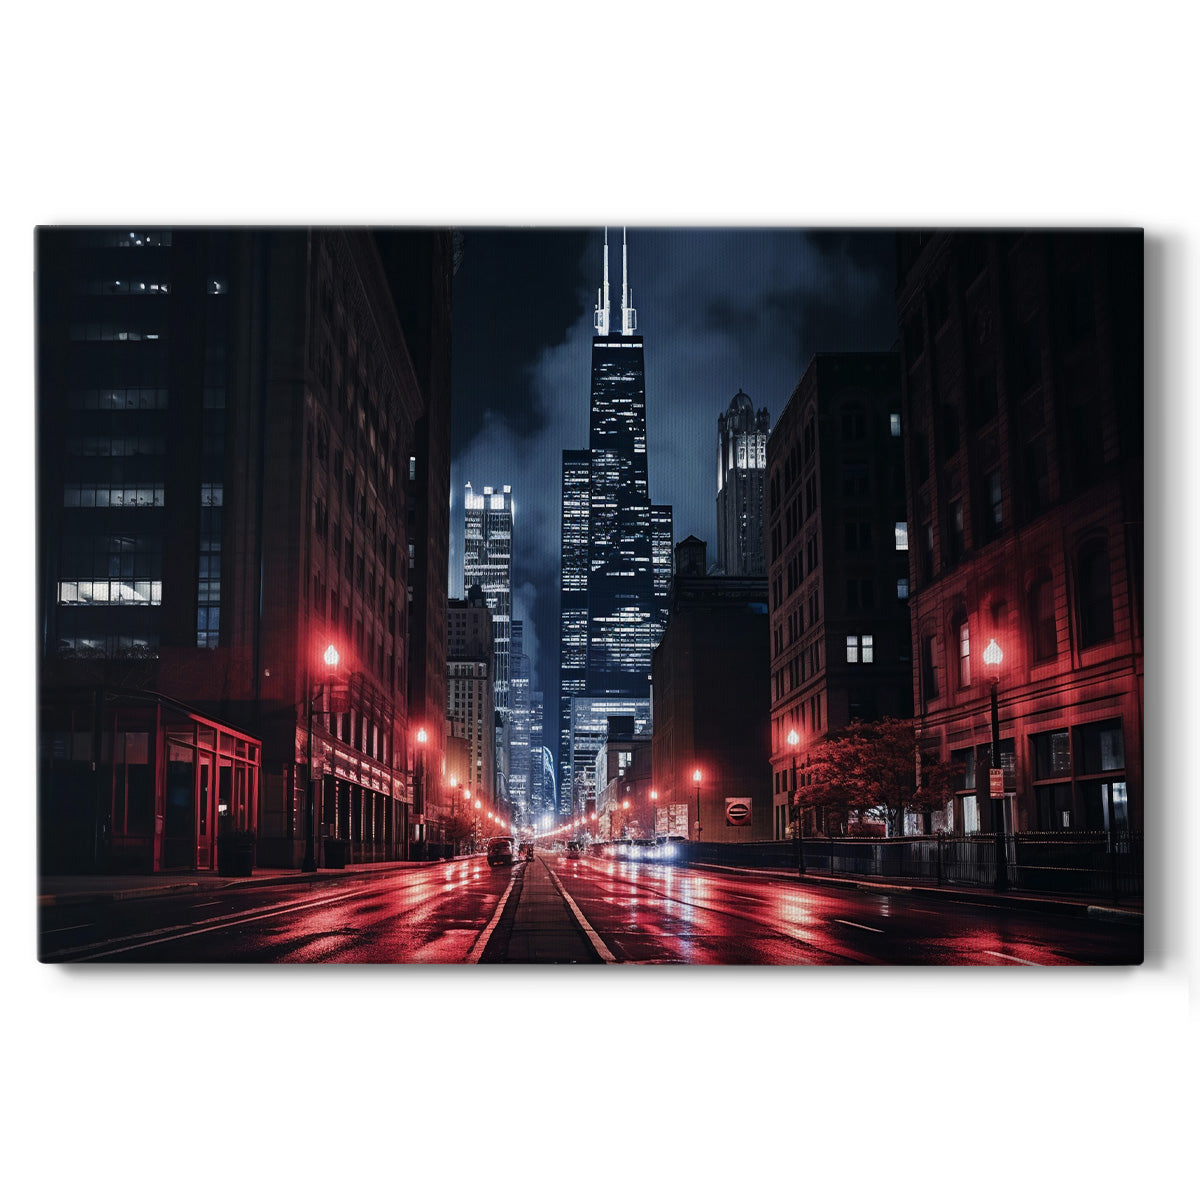 Chicago at Night II - Gallery Wrapped Canvas